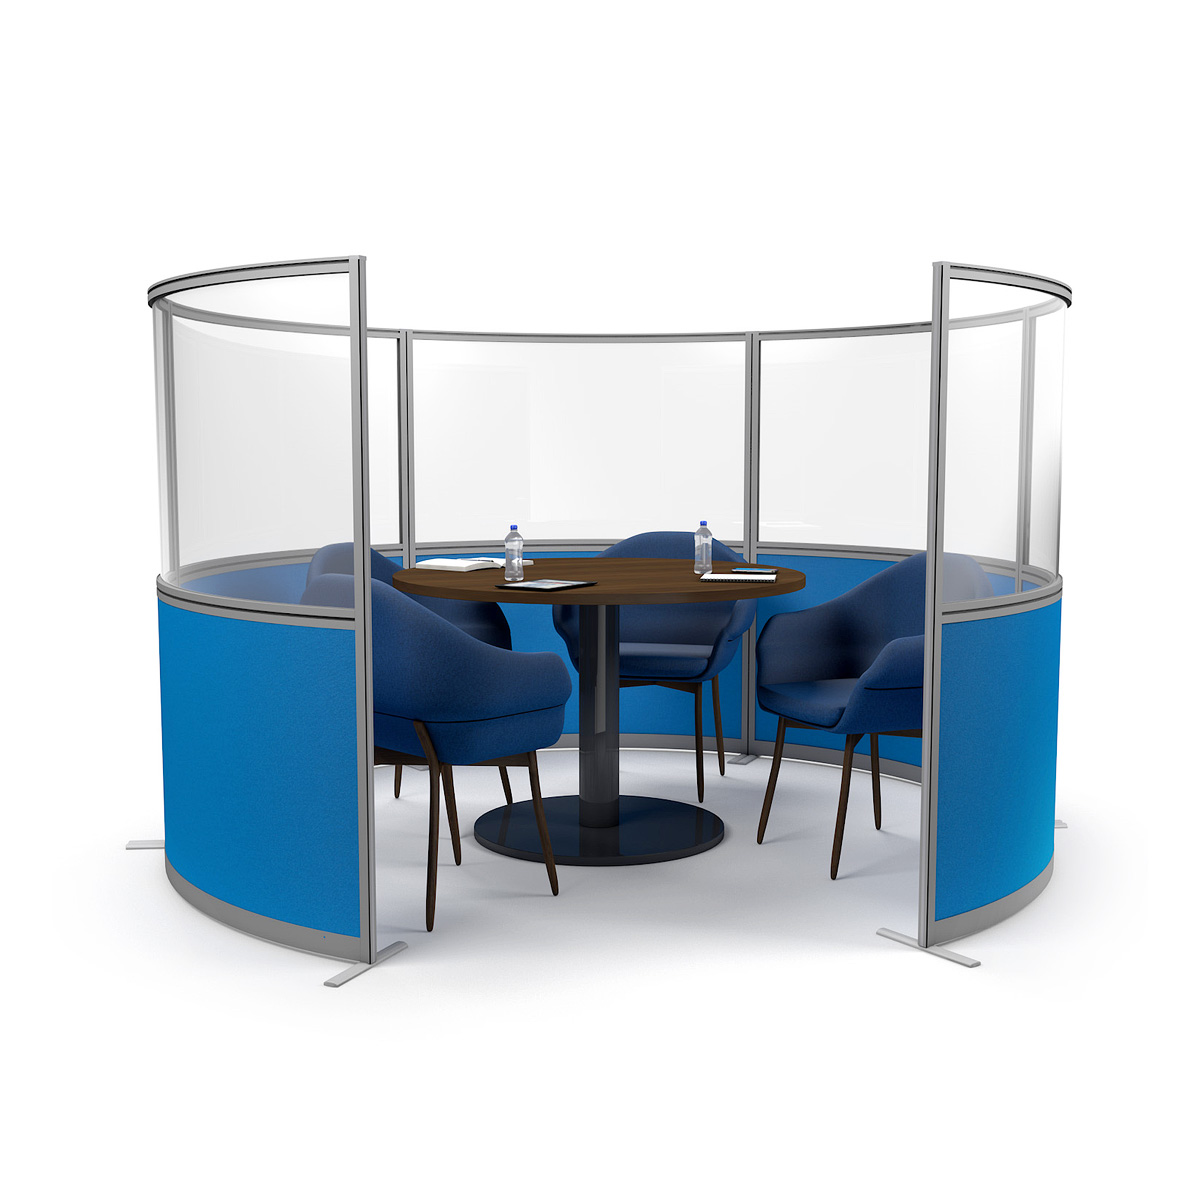 FRONTIER® Curved Part-Glazed Office Partitions Can be Linked To Make Circular Meeting Pods or Work Stations